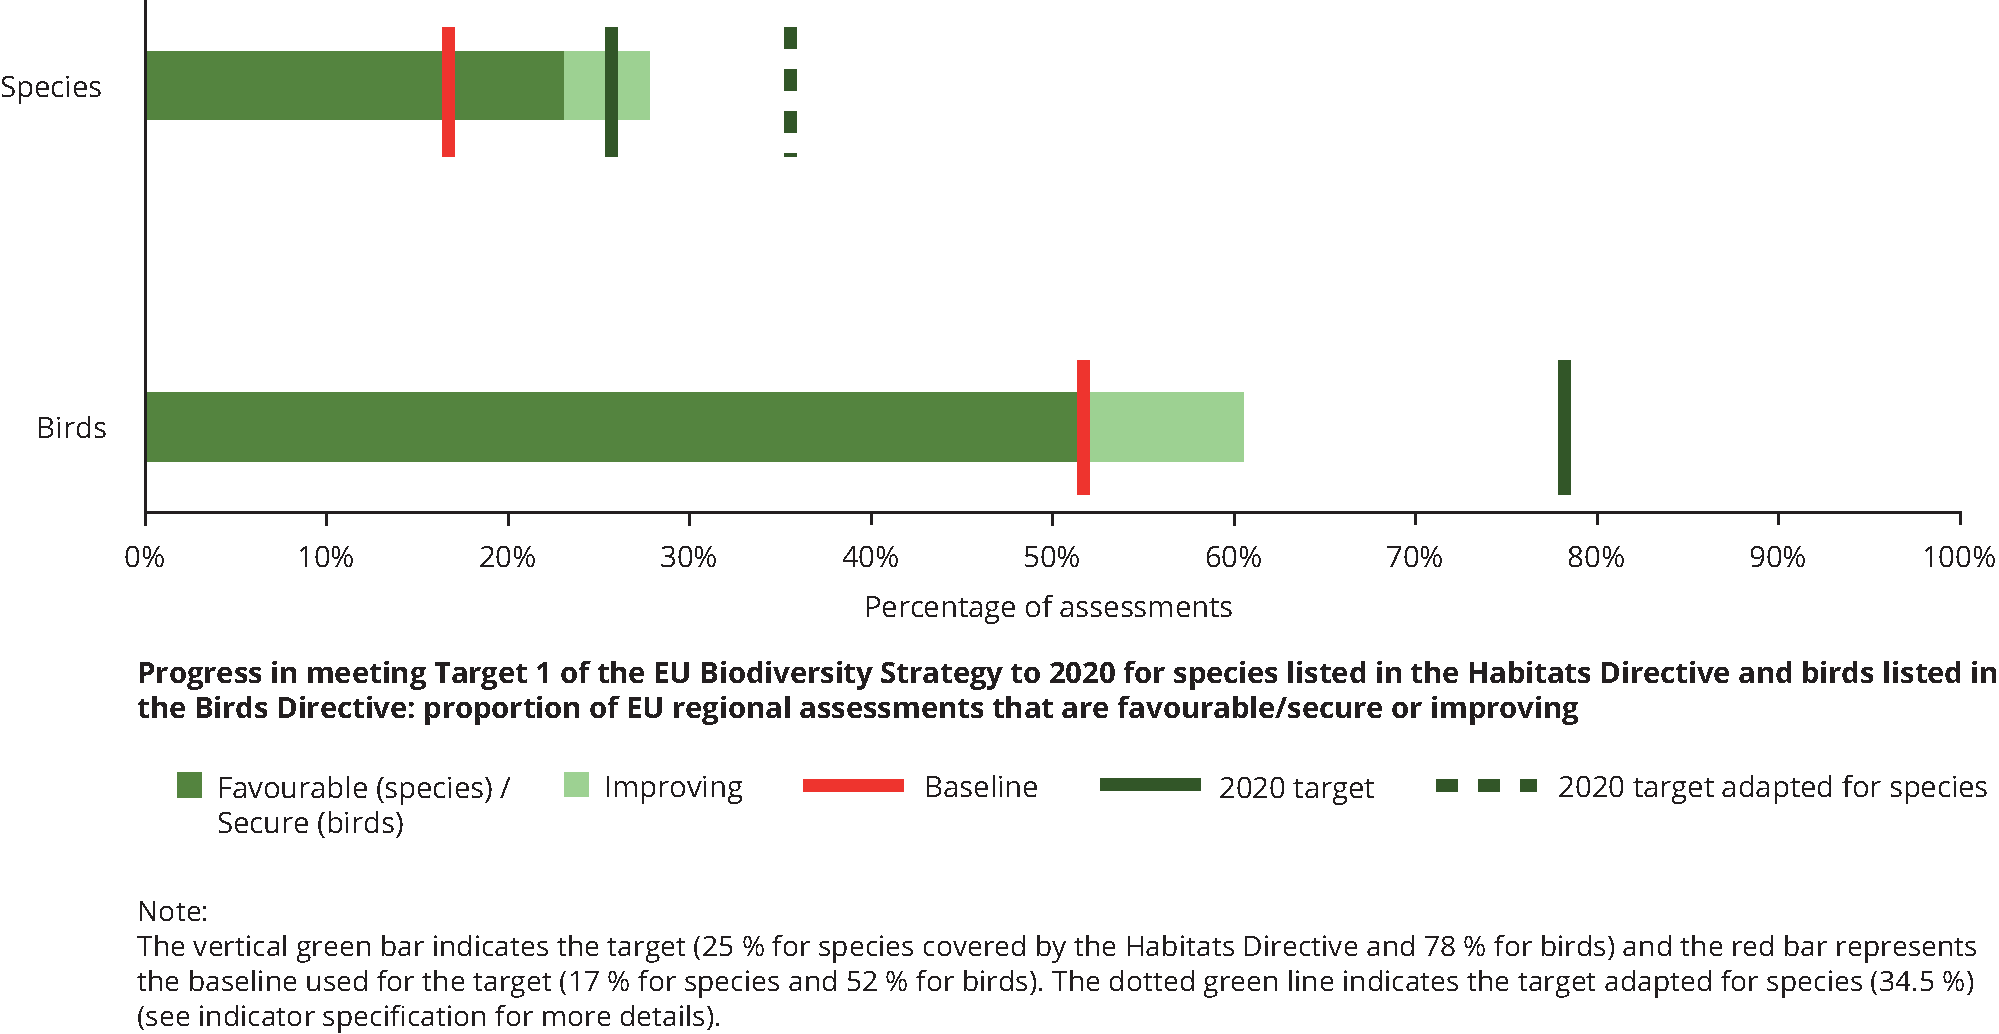 Progress in meeting the 2020 Biodiversity Strategy Target 1 for species (Habitats Directive) and birds (Birds Directive): proportion of EU regional assessments that are favourable/secure or improving